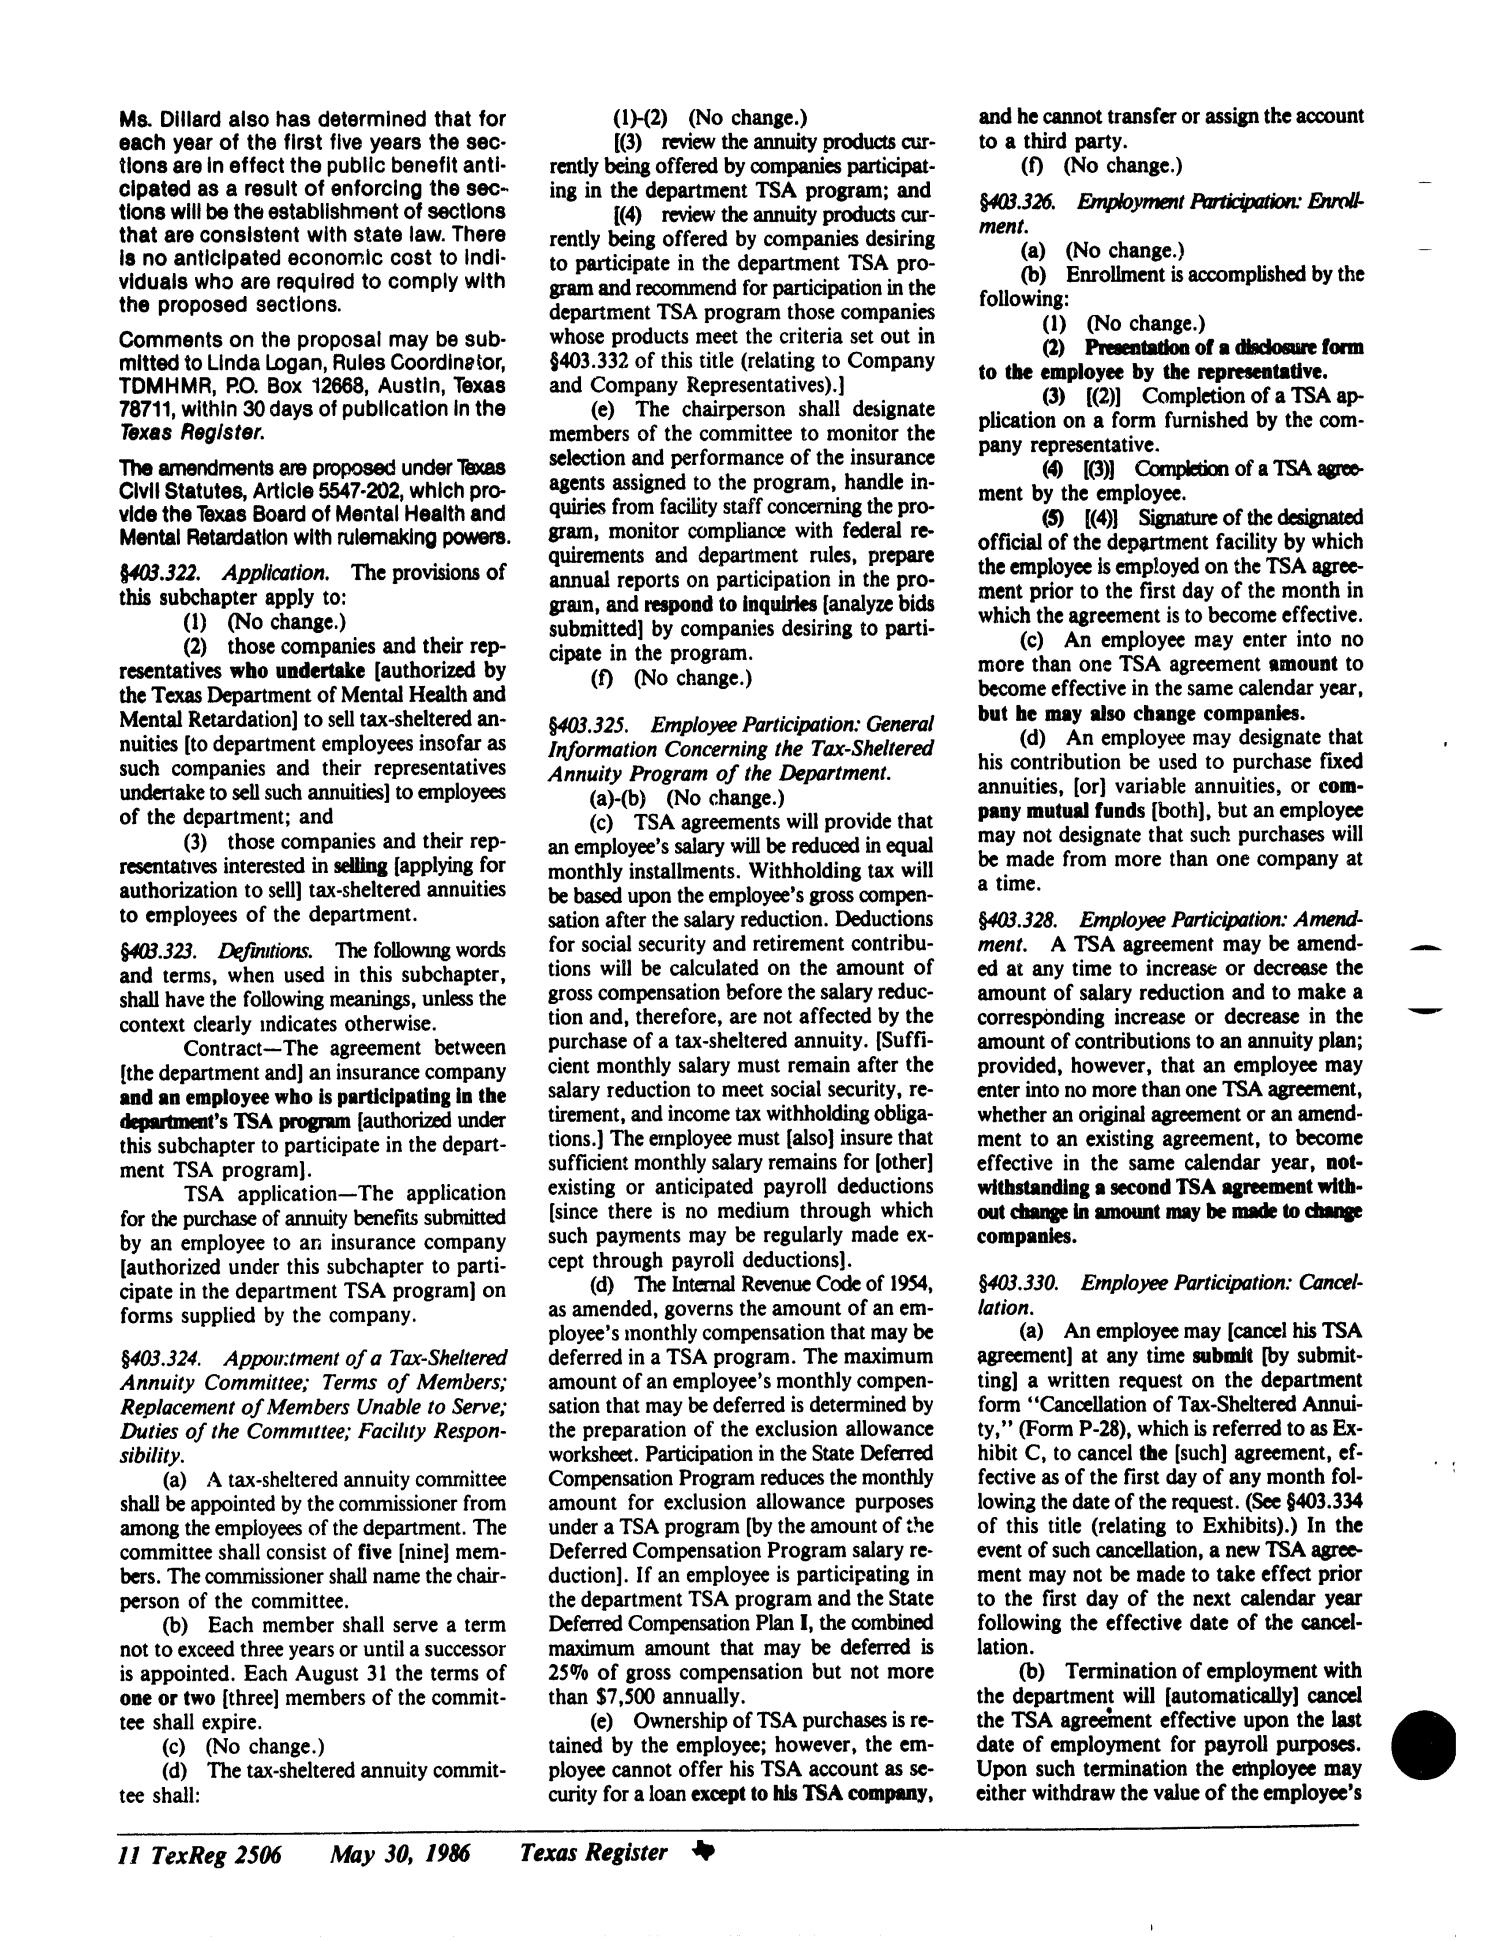 Texas Register, Volume 11, Number 41, Pages 2491-2534, May 30, 1986
                                                
                                                    2506
                                                